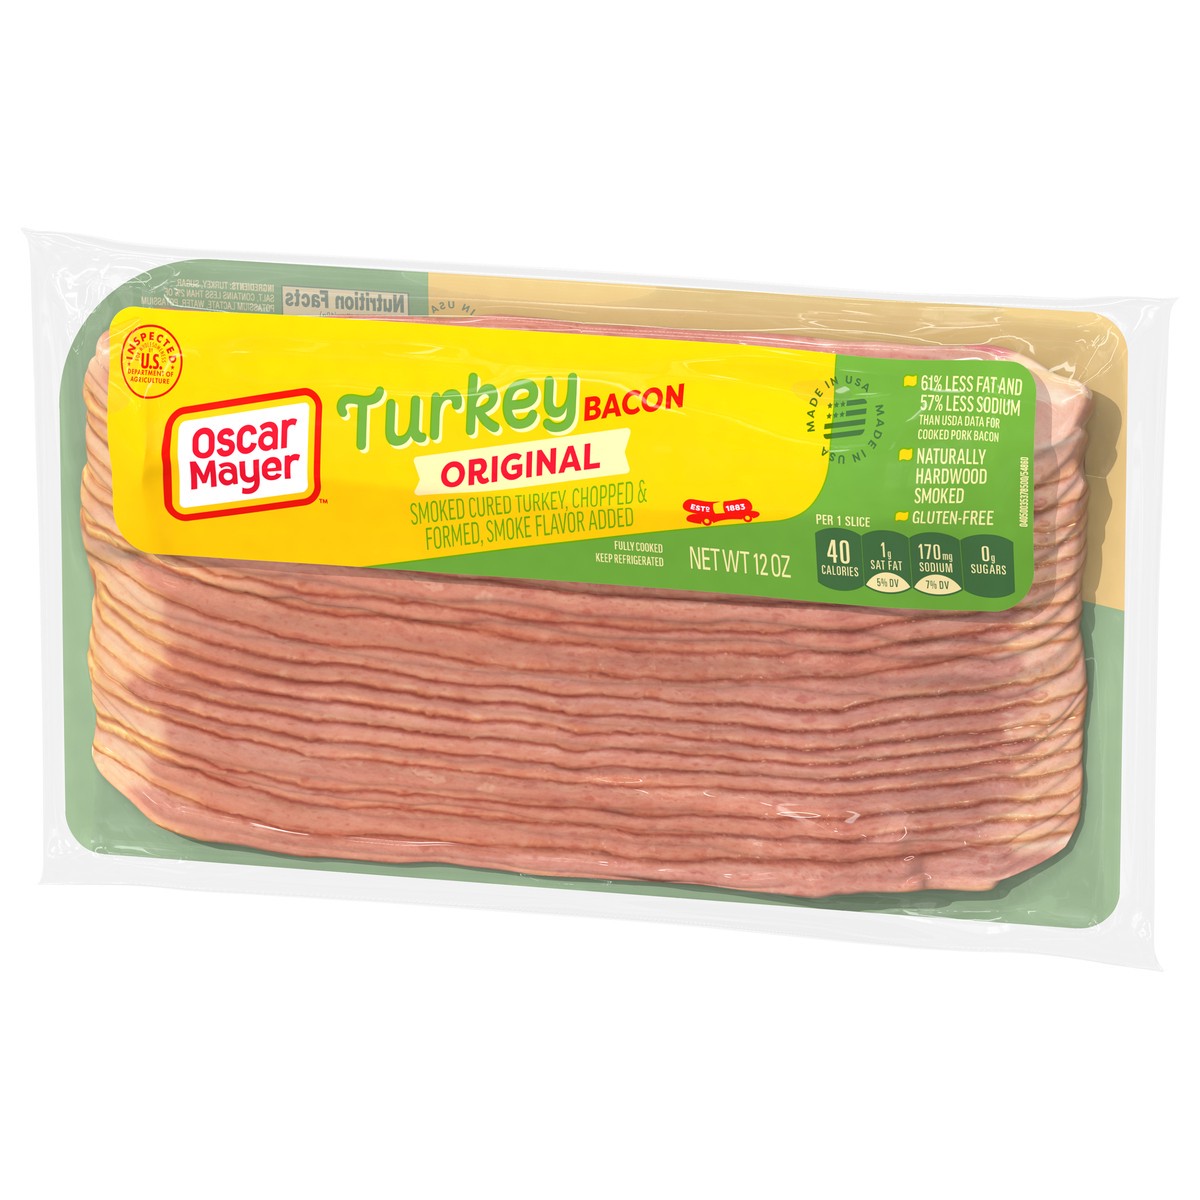 slide 3 of 9, Oscar Mayer Gluten Free Turkey Bacon with 58% Less Fat & 57% Less Sodium, 12 oz Pack, 21-23 slices, 12 oz